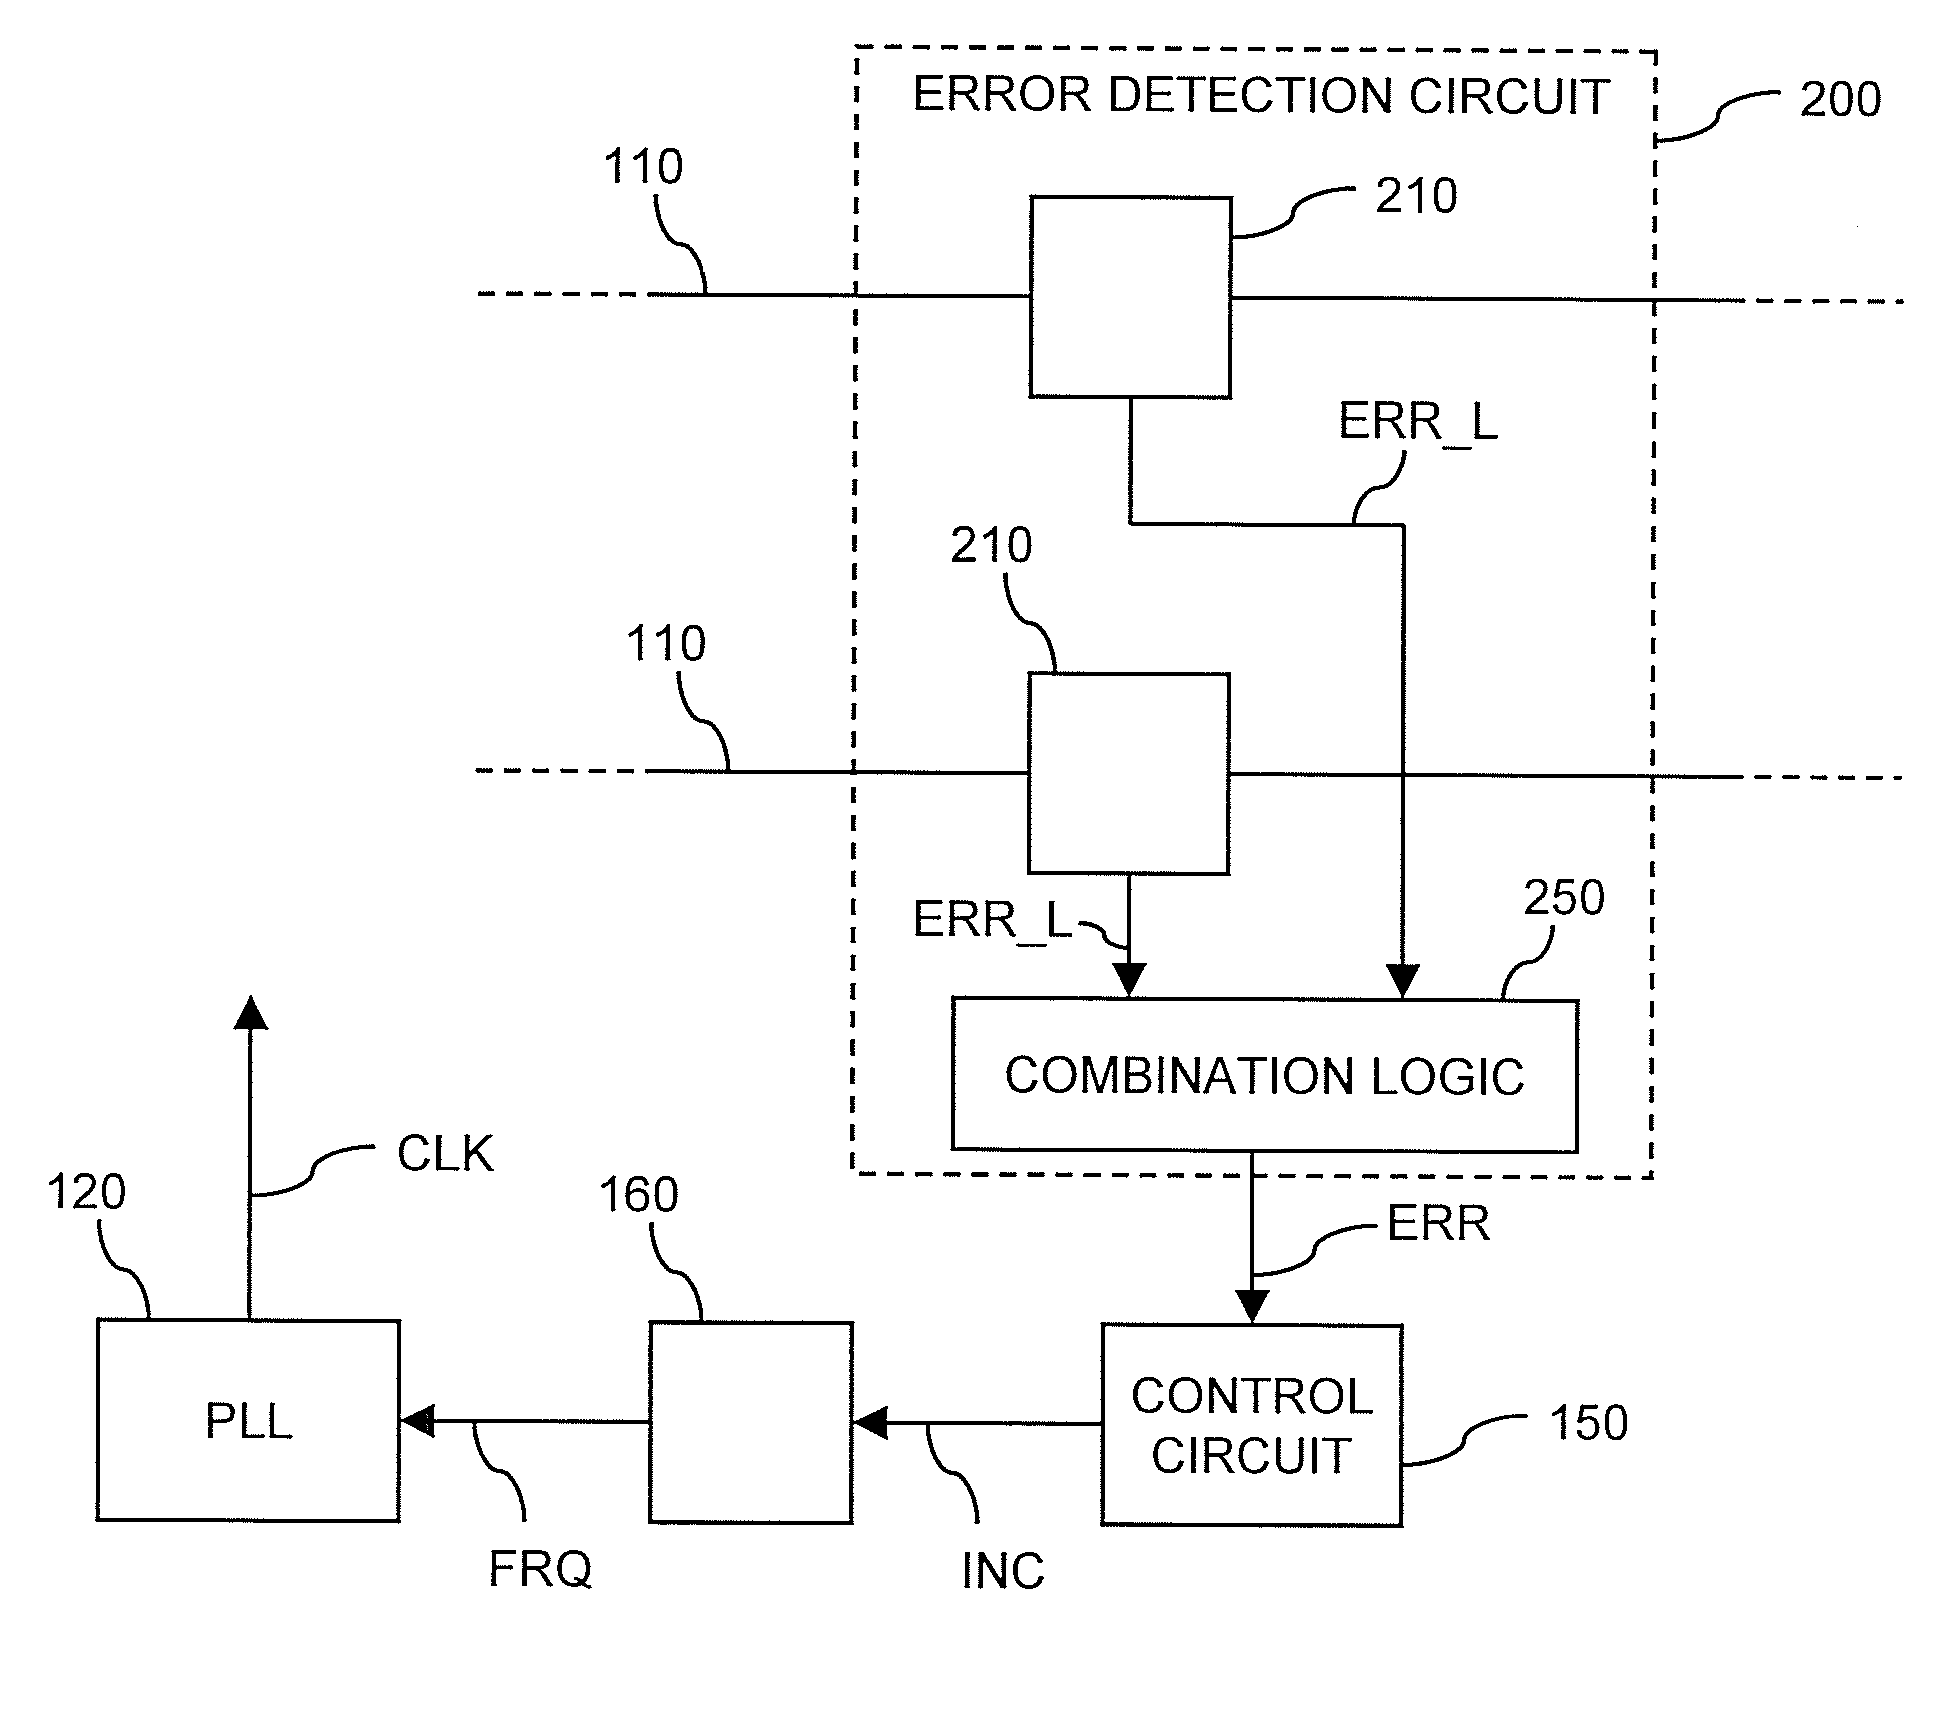 Error detection in an integrated circuit